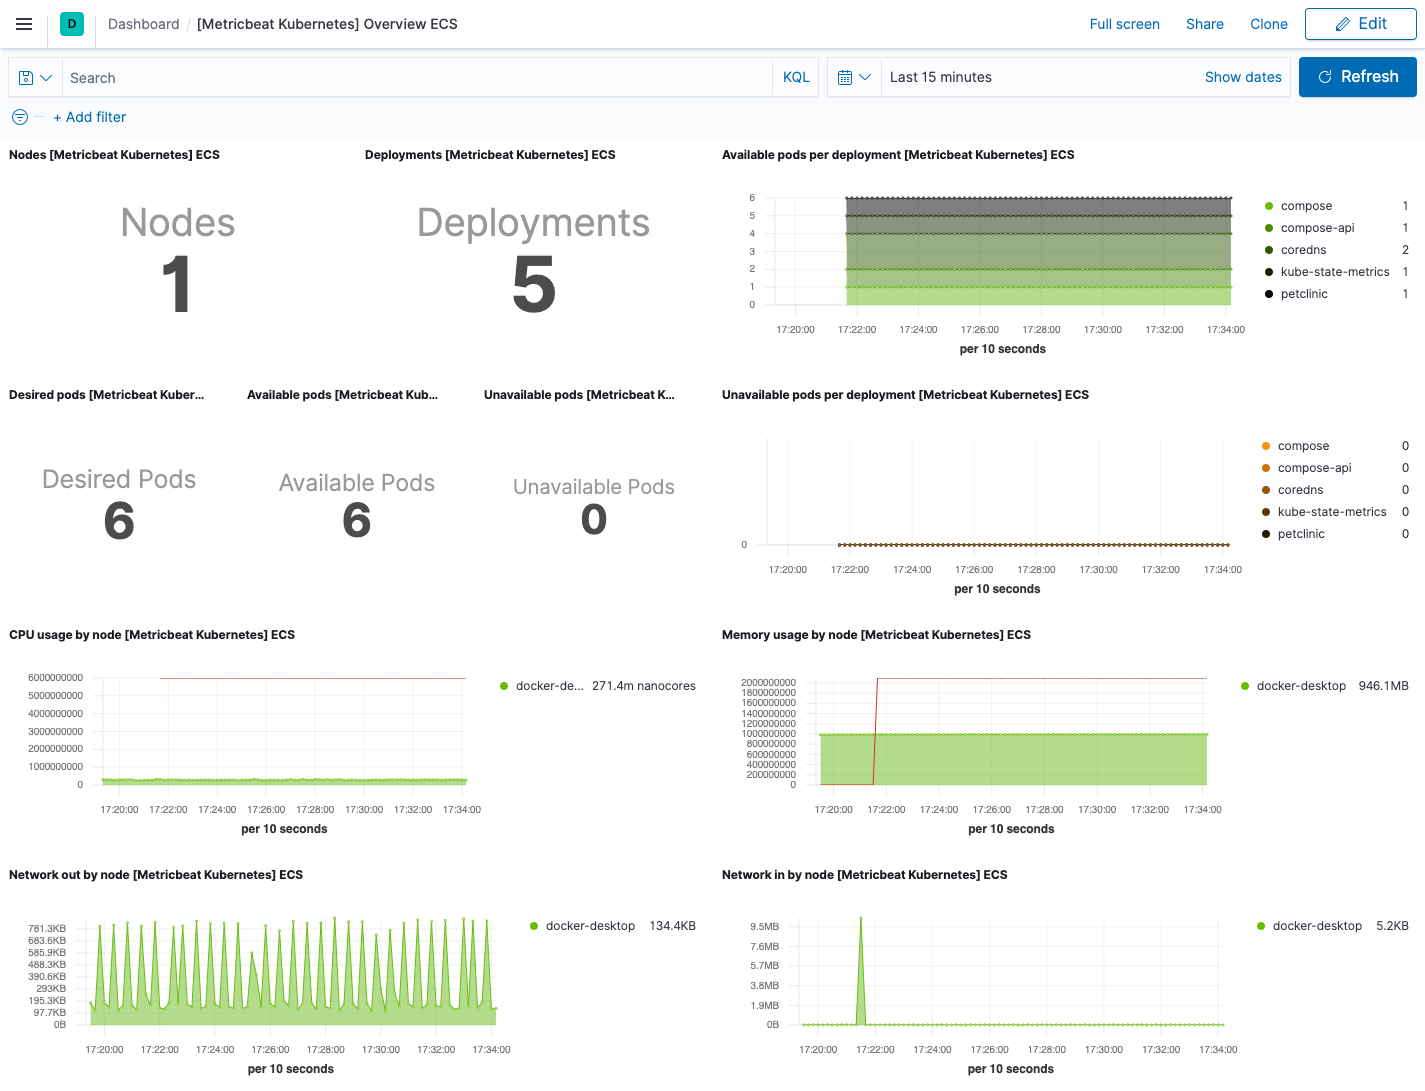 Kubernetes overview dashboard